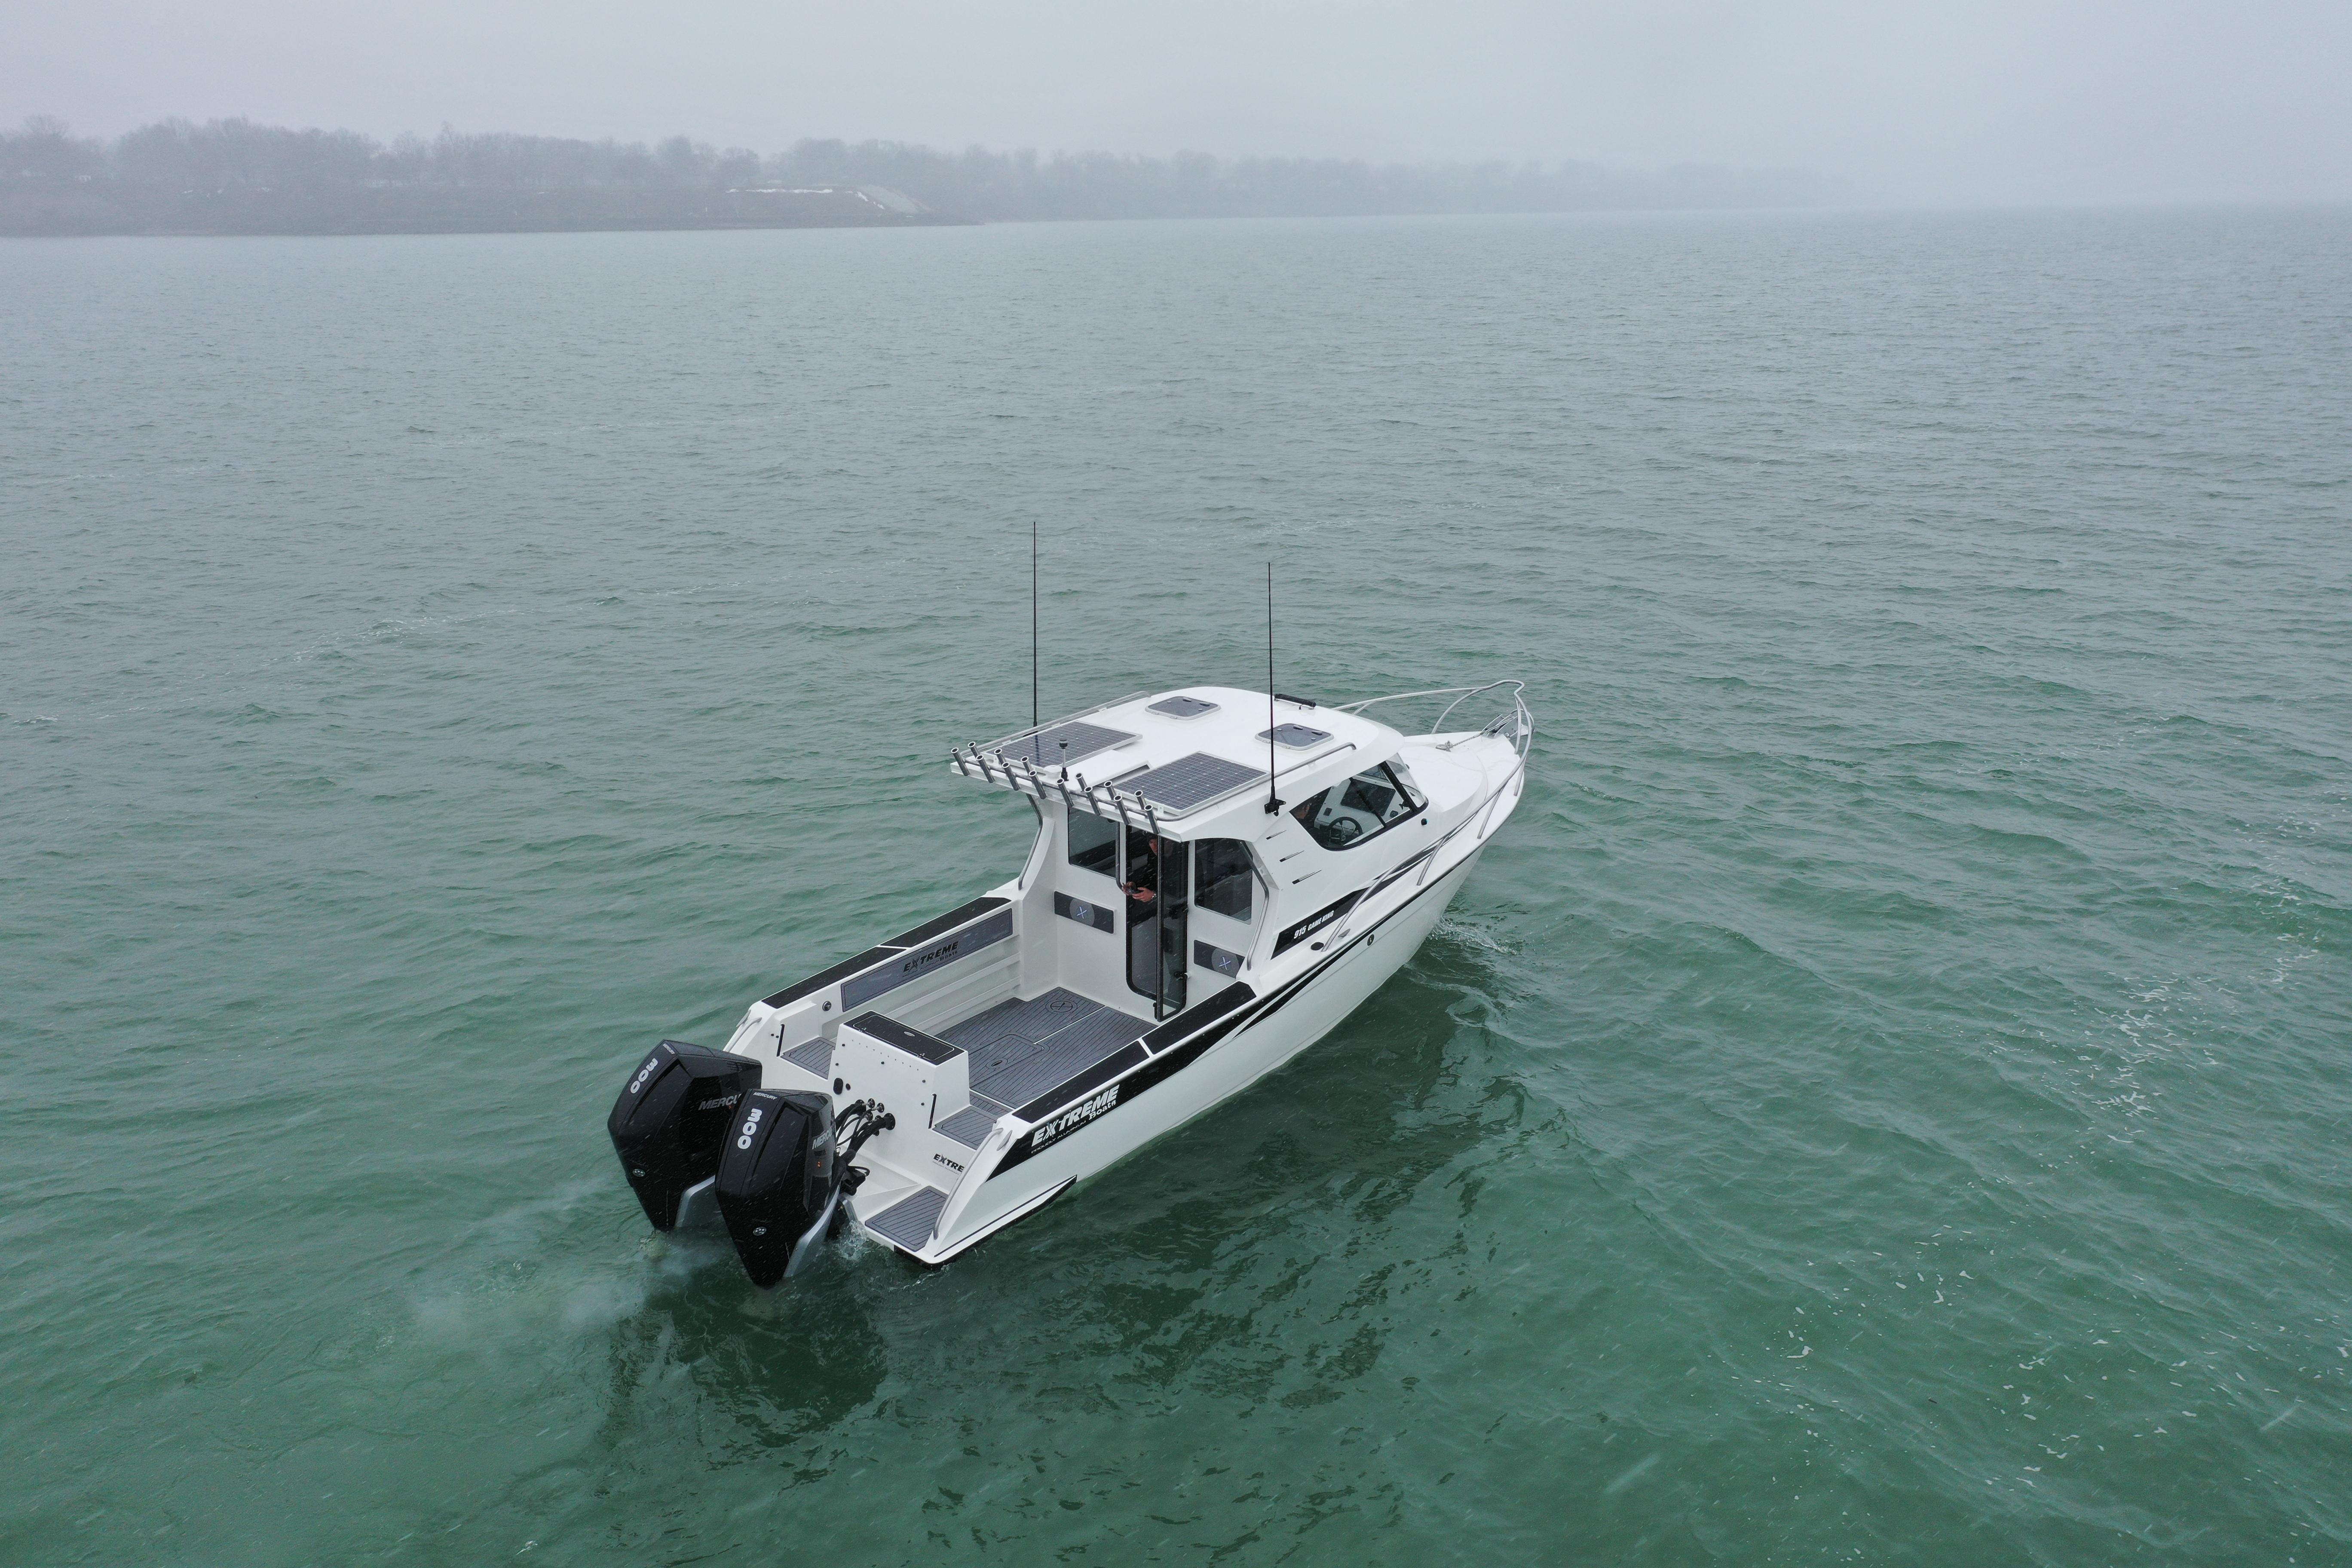 2021 Extreme Boats 915 30' Gameking off Cleveland 1-6-21 For Sale by Great Lakes Boats and Brokerage 440 221 9001 